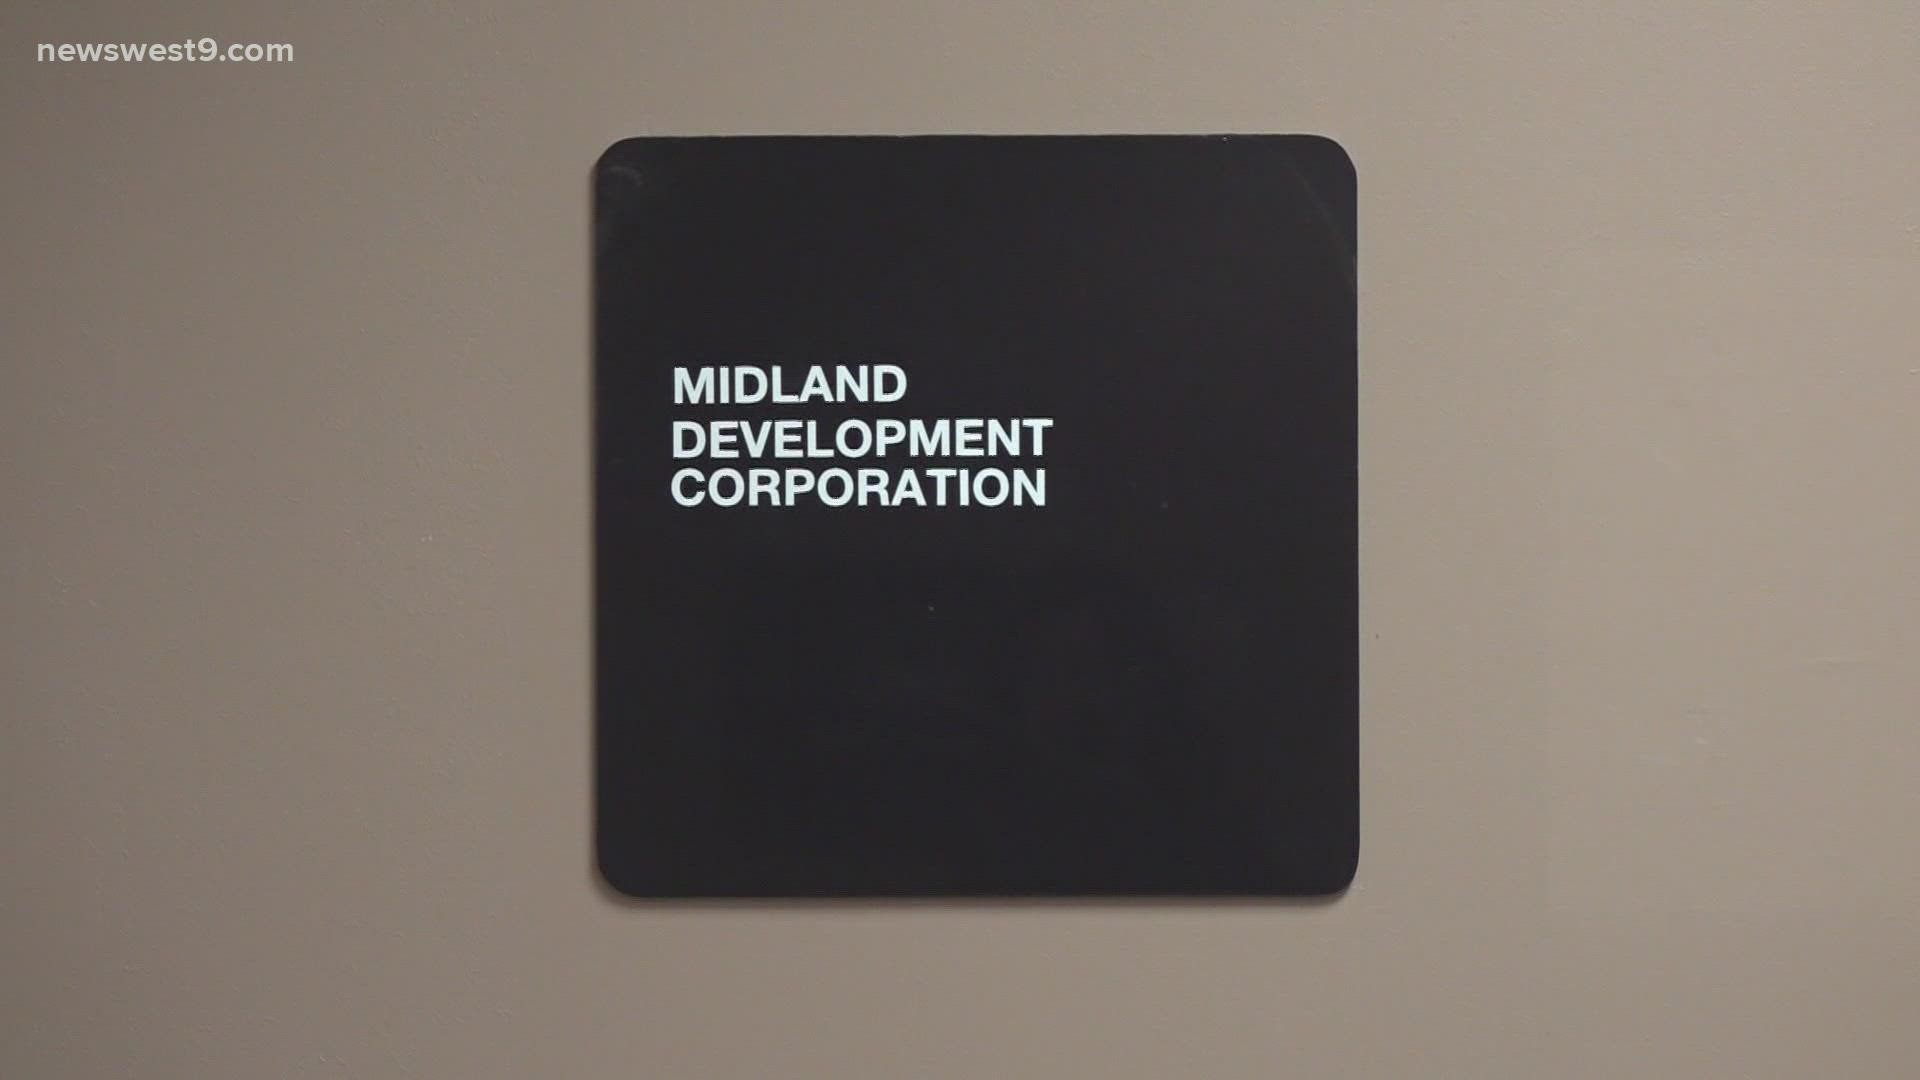 The school received a grant from the Midland Development Corporation for about $117,000.